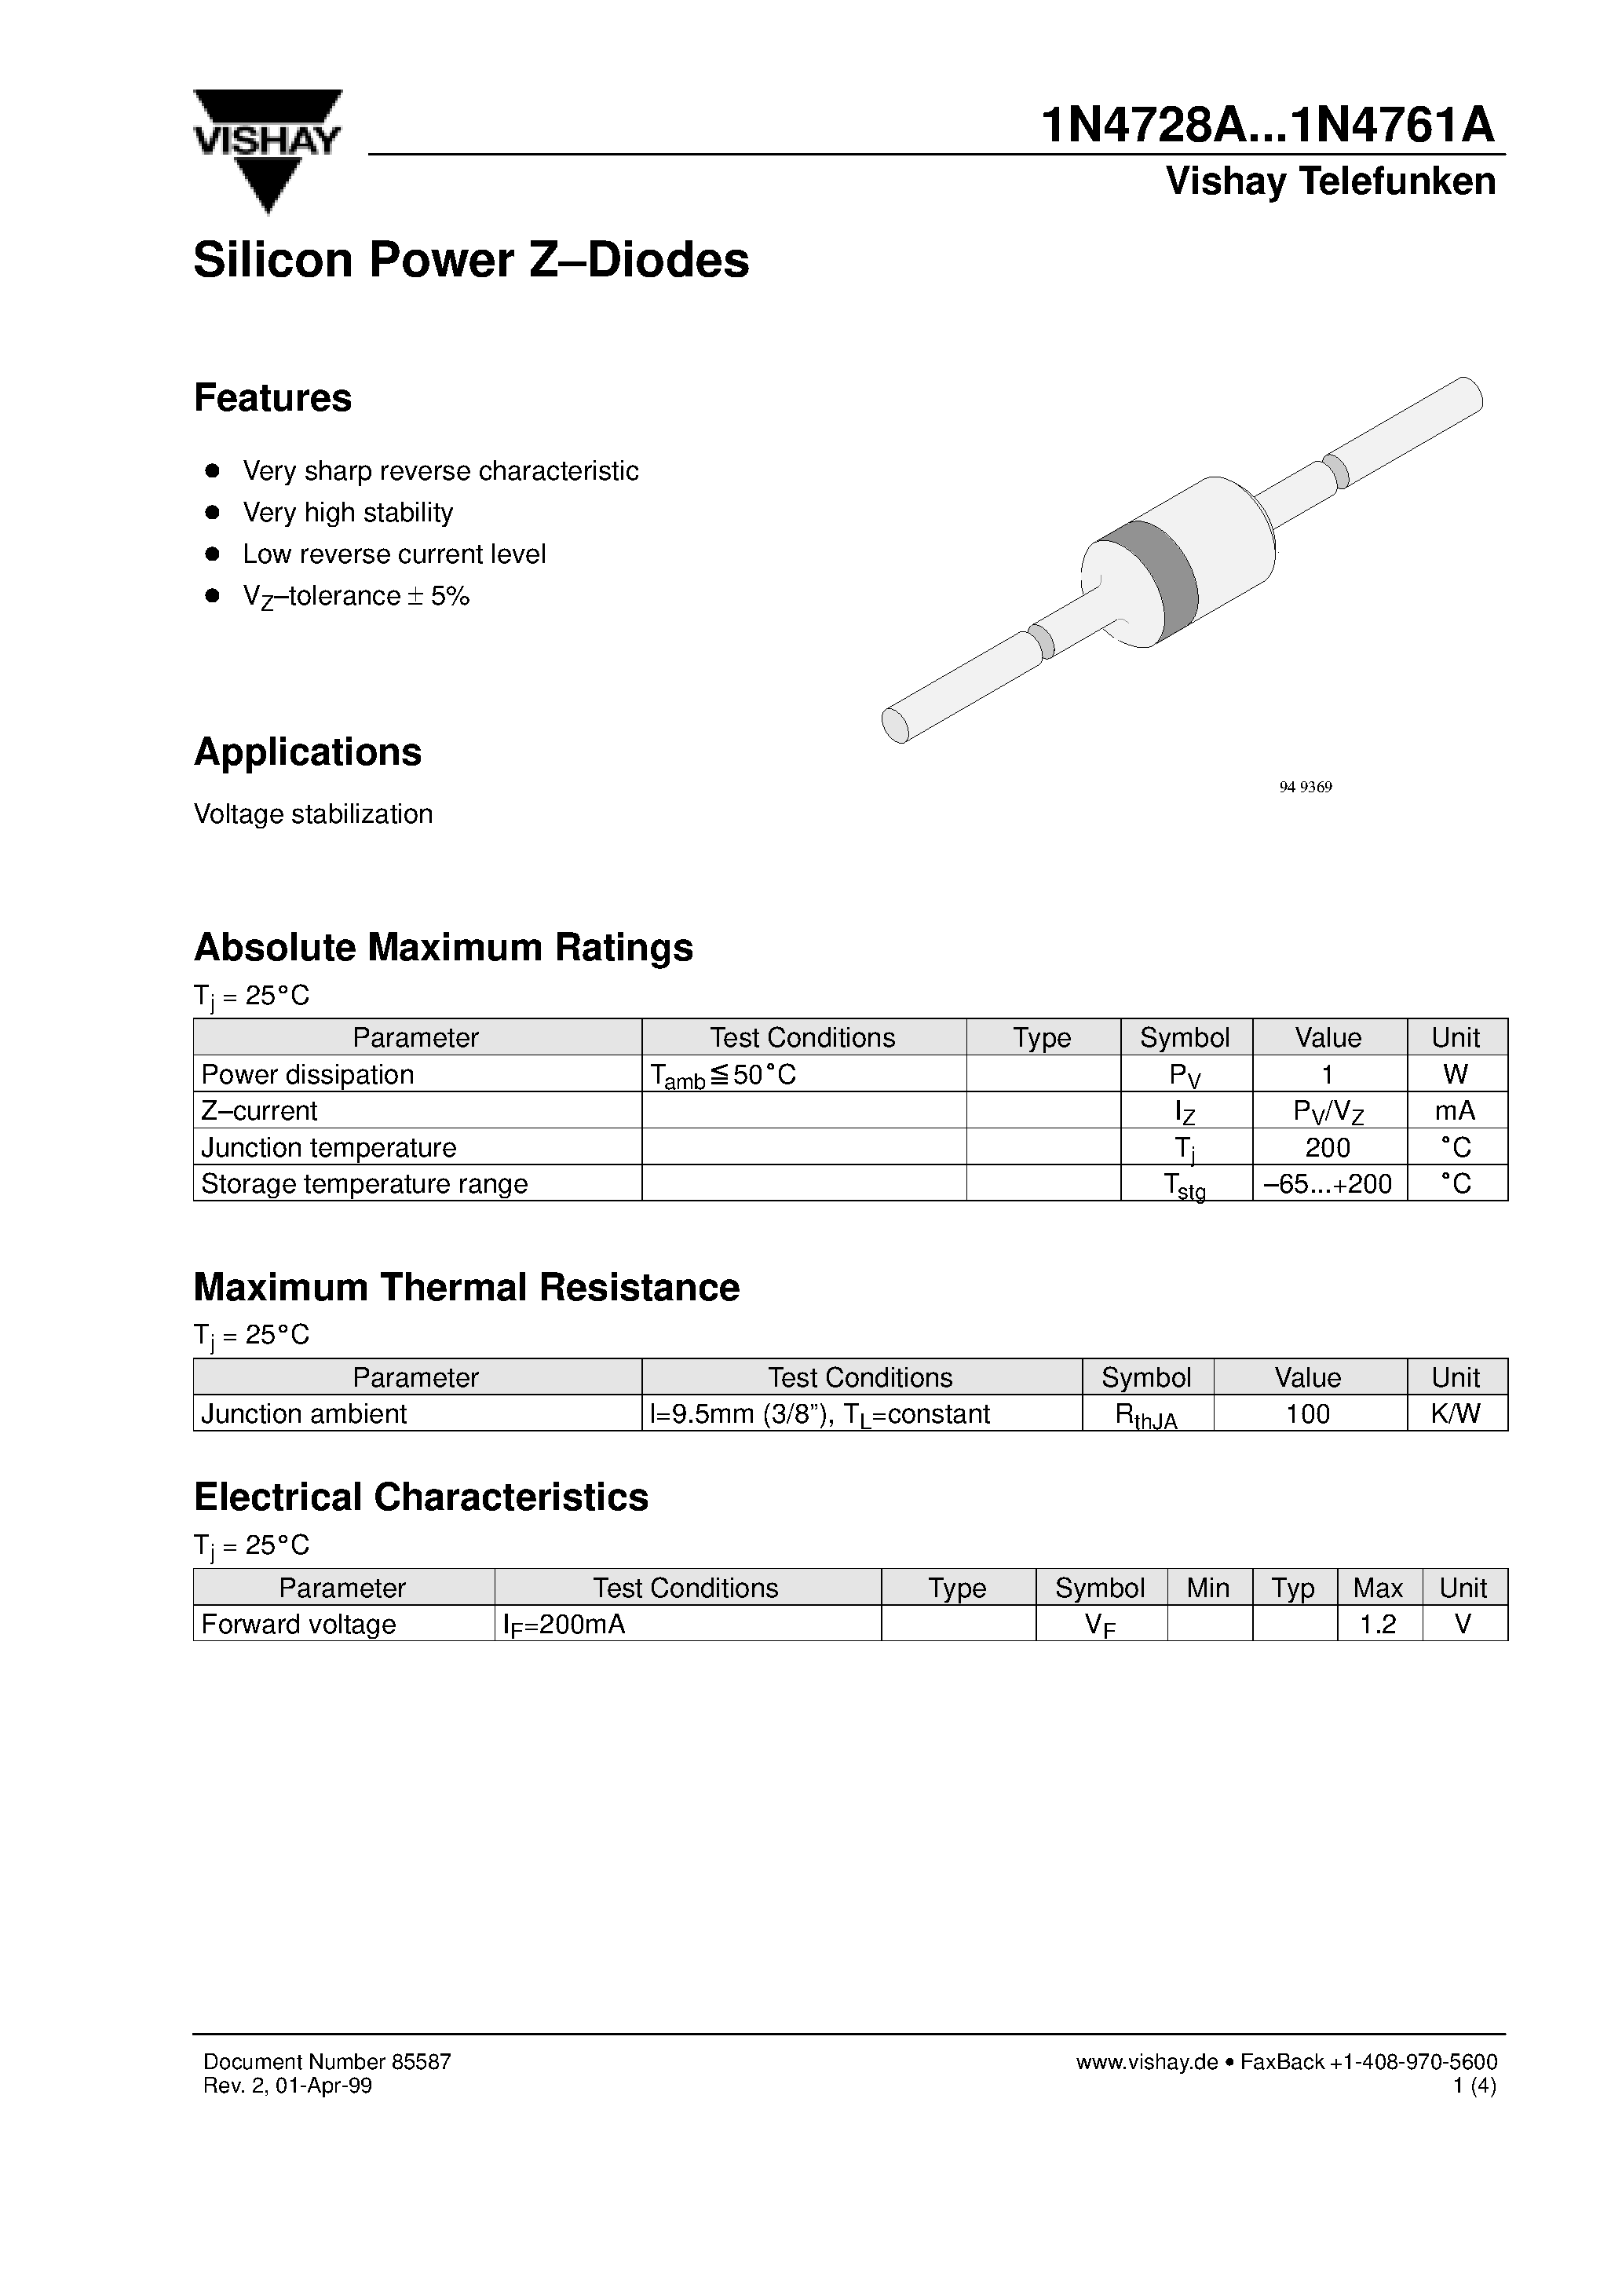 Datasheet 1N4748A - Silicon Power Z-Diodes page 1